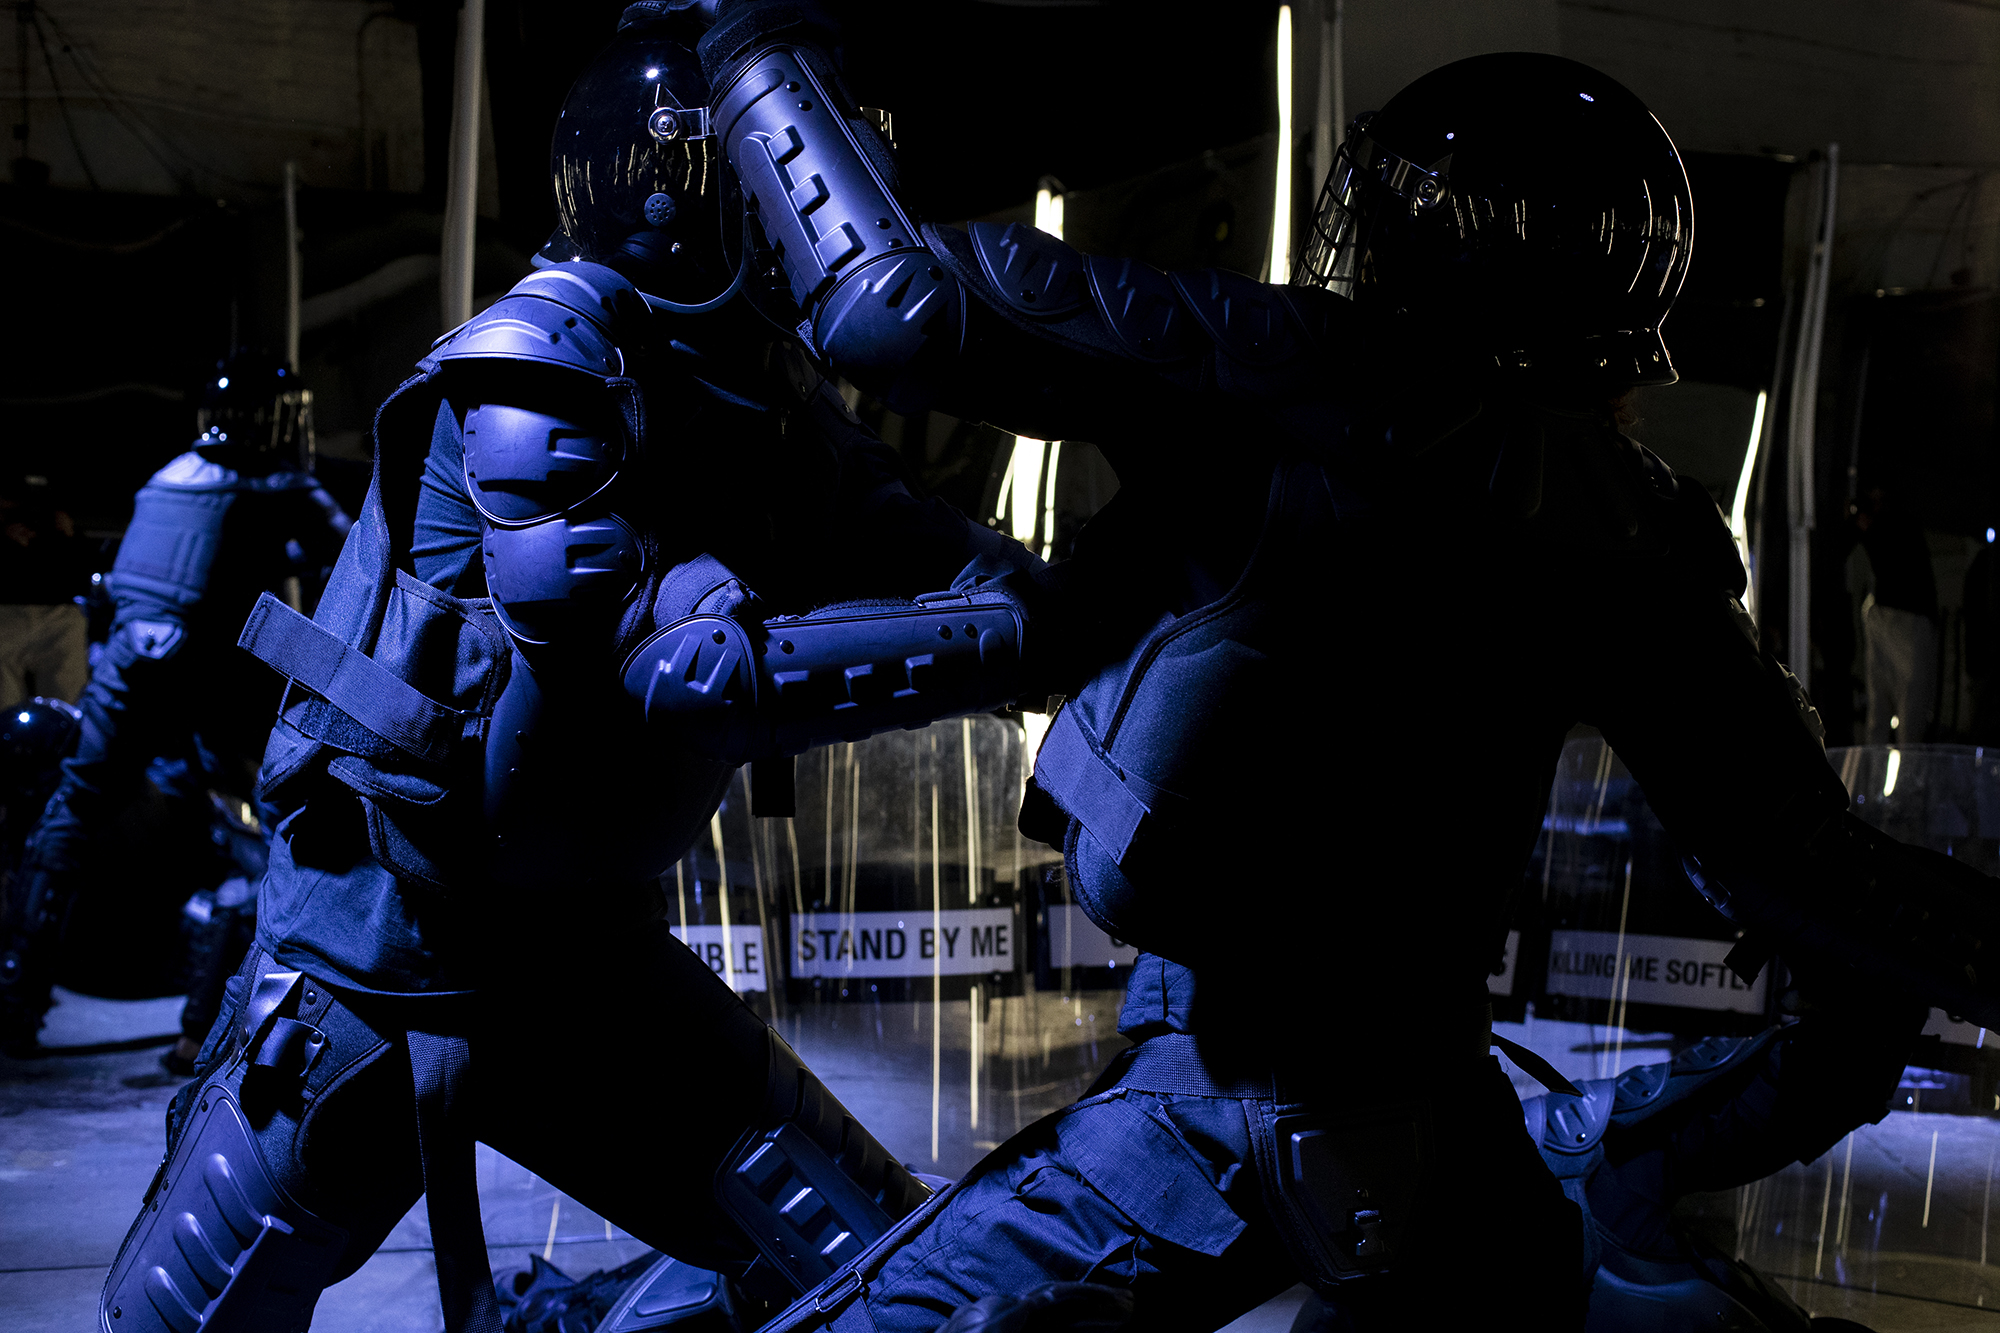 two people in riot gear simulate fighting